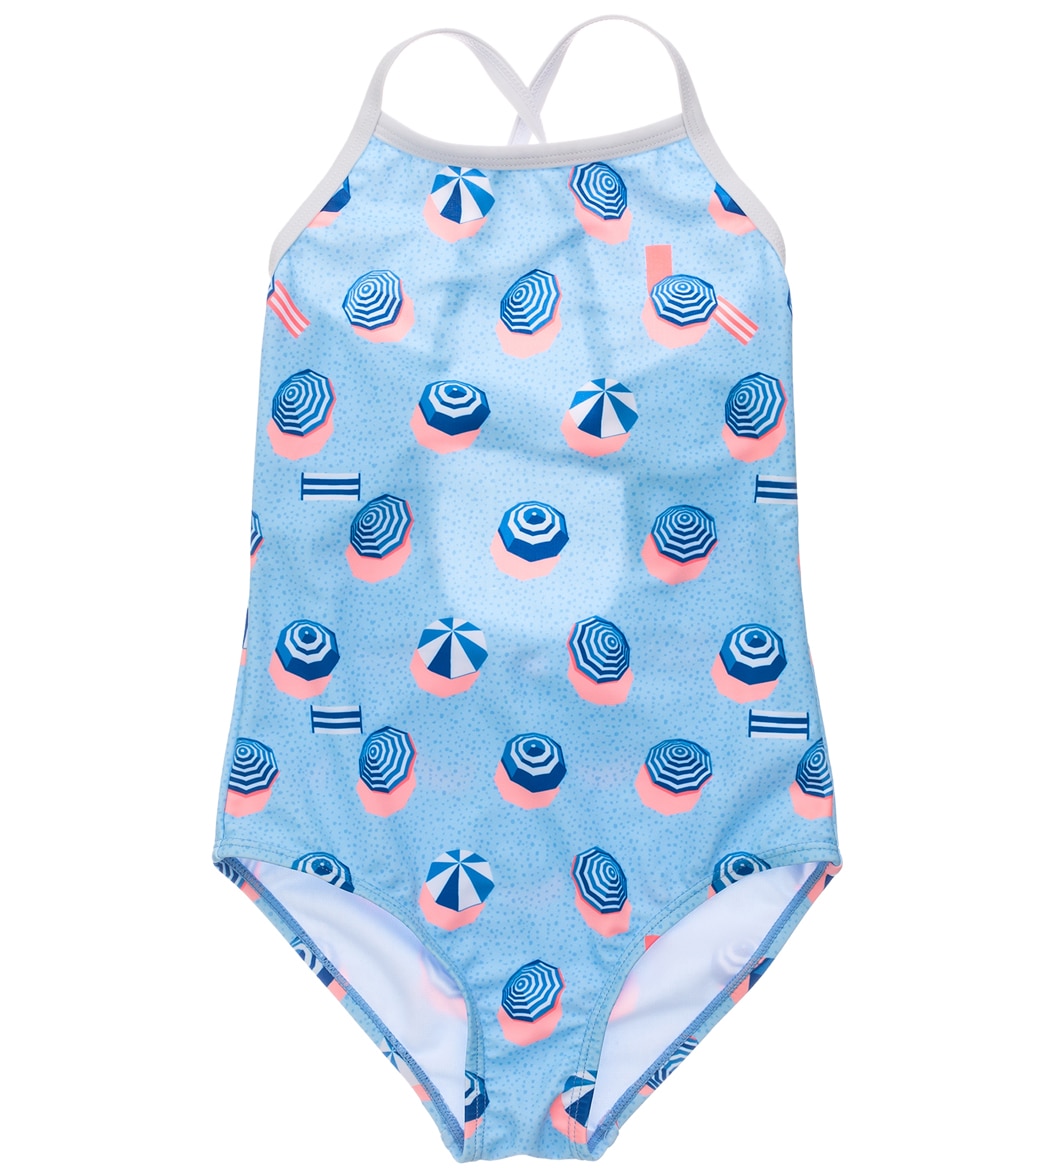 Snapper Rock Girls' French Riviera X Back Tie One Piece Swimsuit - Blue 12 Elastane/Polyamide - Swimoutlet.com